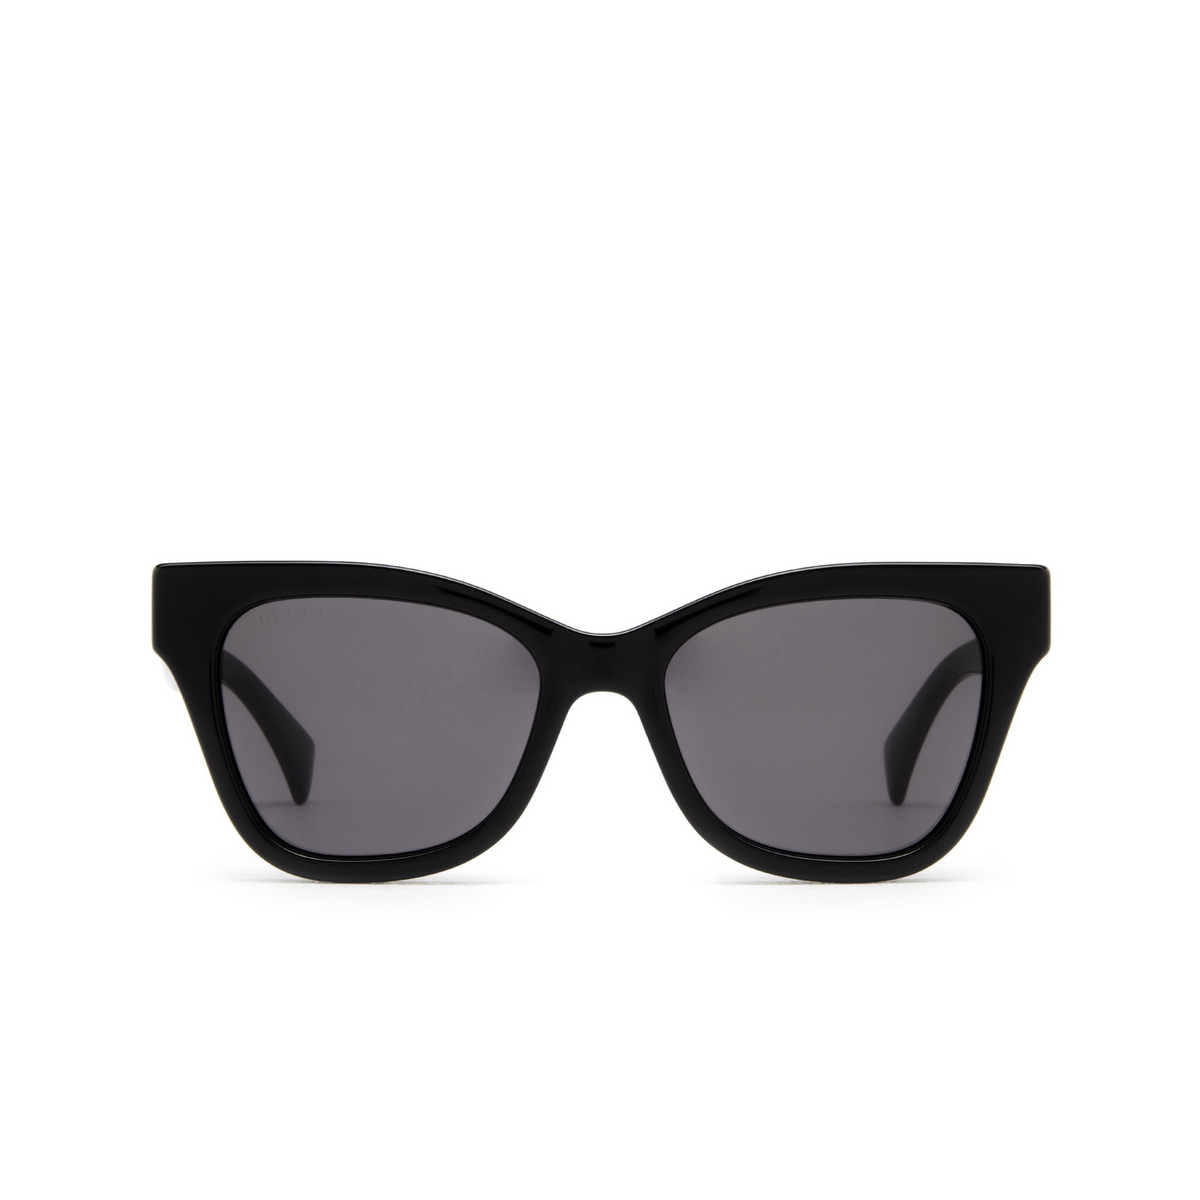 Gucci® Cat-eye Sunglasses: GG1133S color Black 001 - front view.